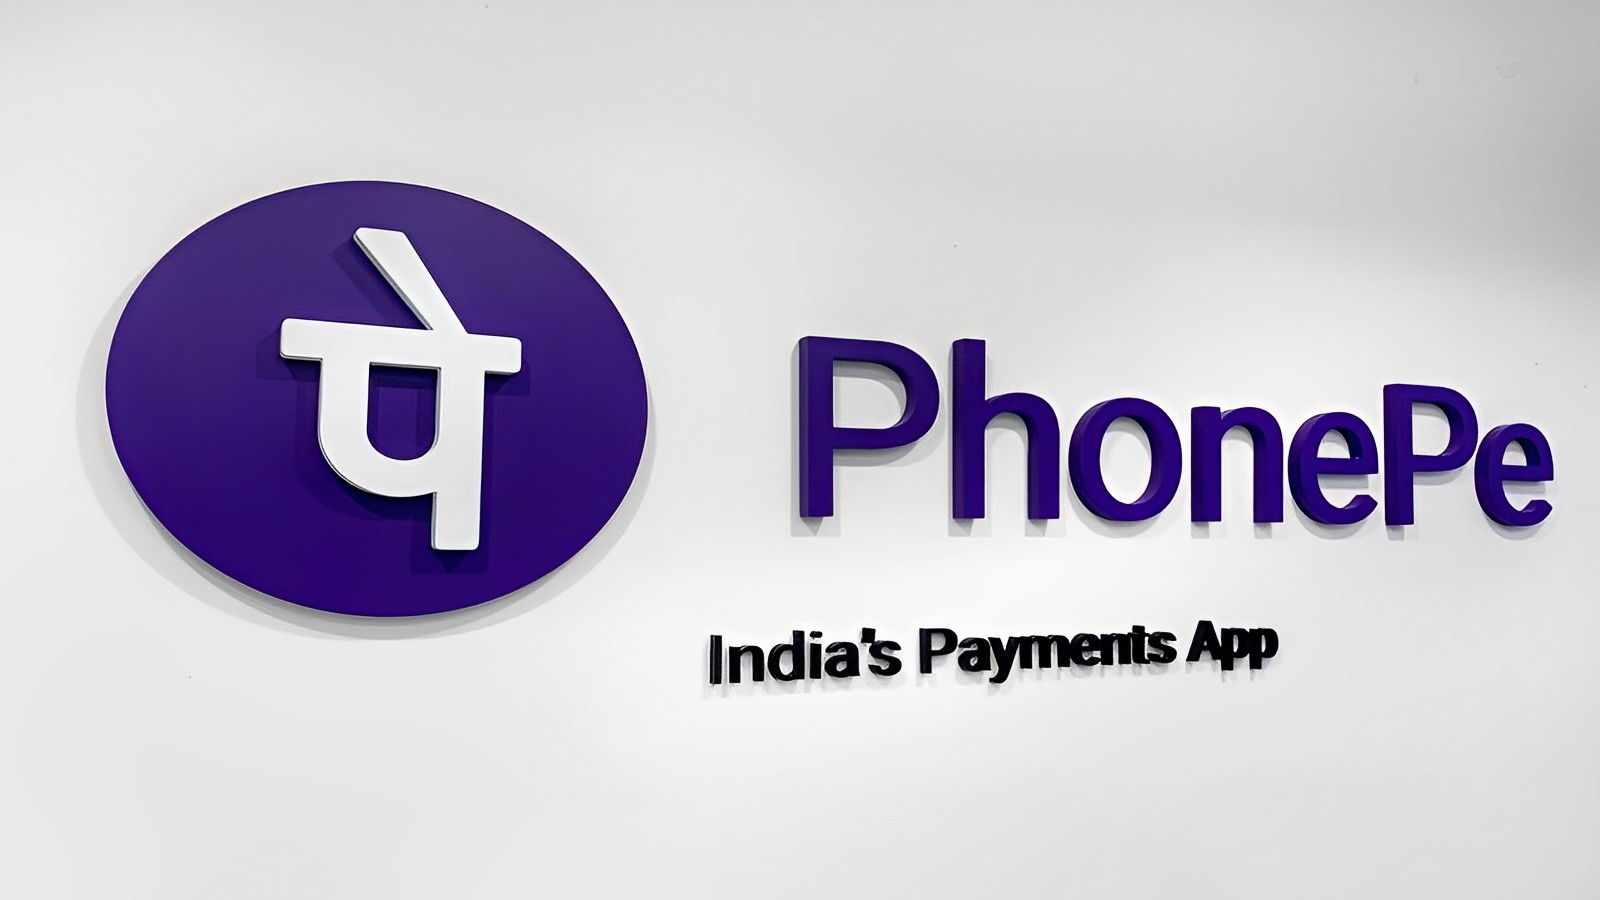 PhonePe Secures $200Mn Extra Funding from Walmart